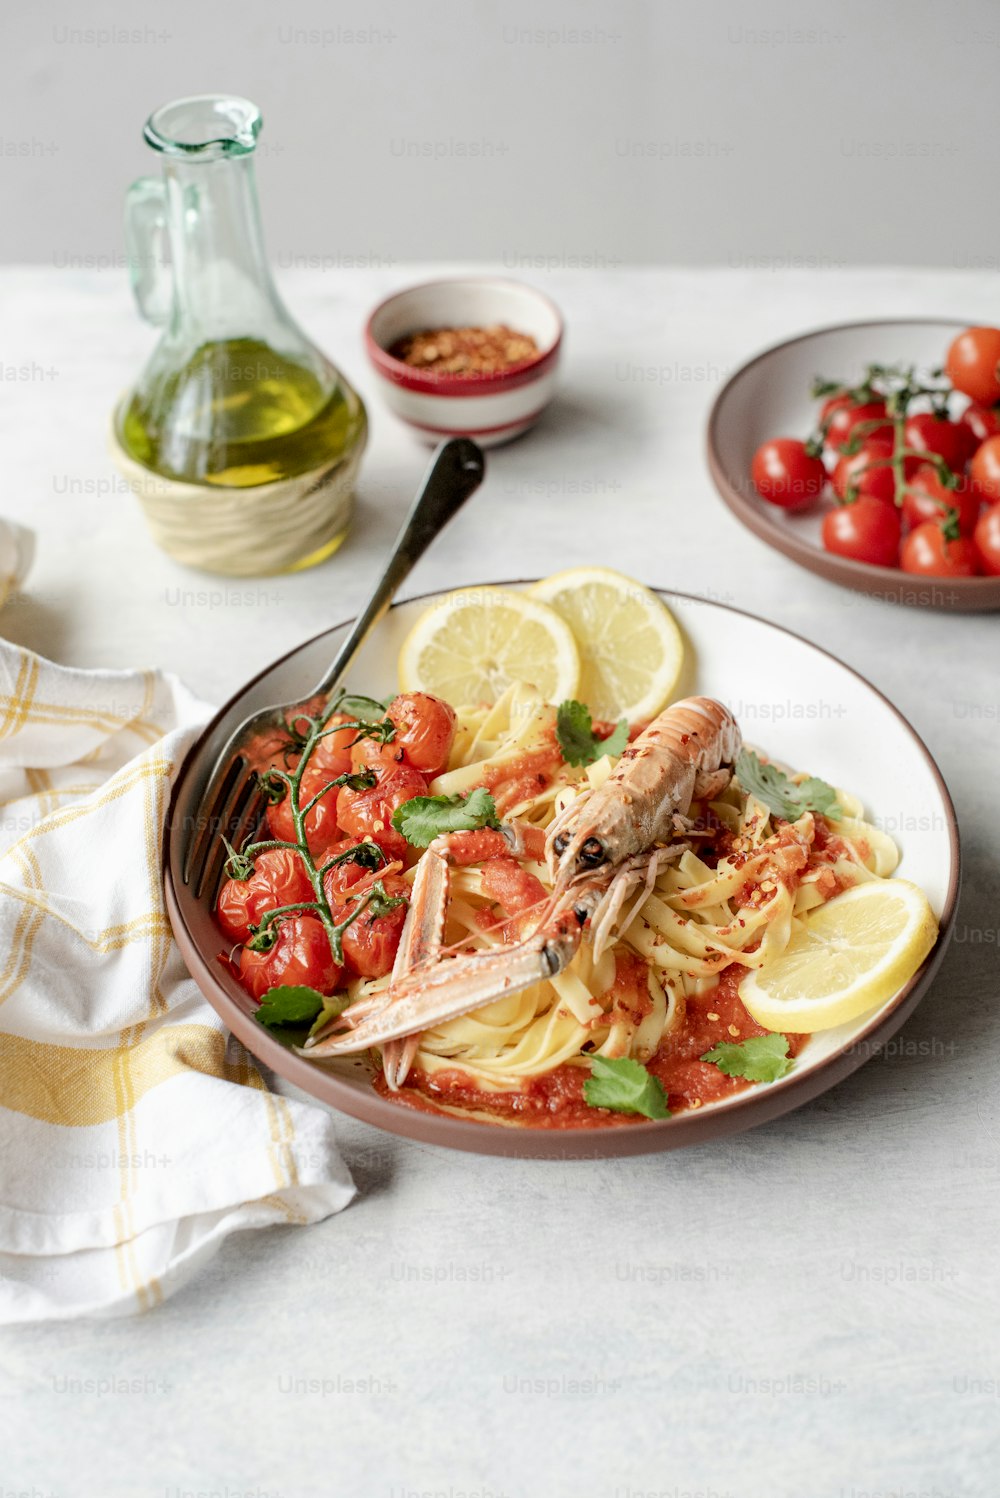 a plate of pasta with shrimp, tomatoes, and herbs